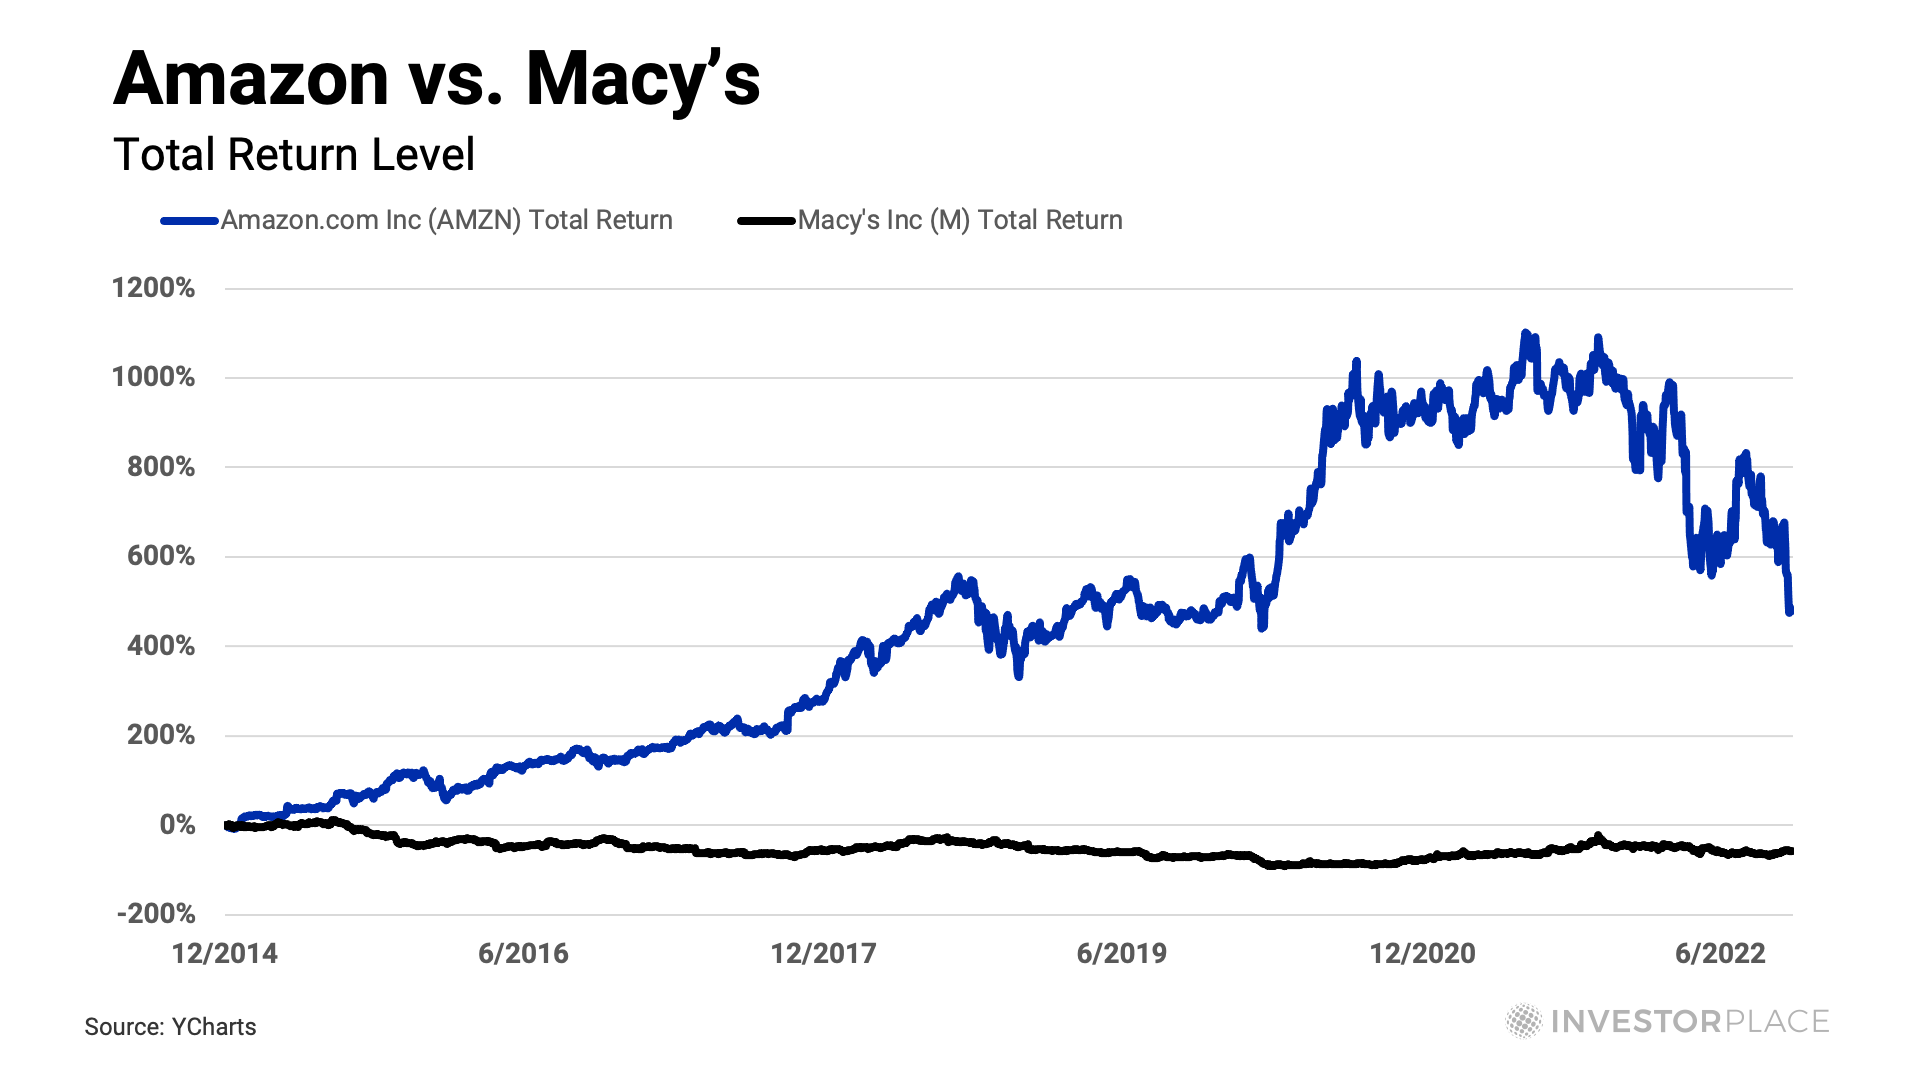 Image of Amazon versus Macy's stock total return from 2014 to 2022. 